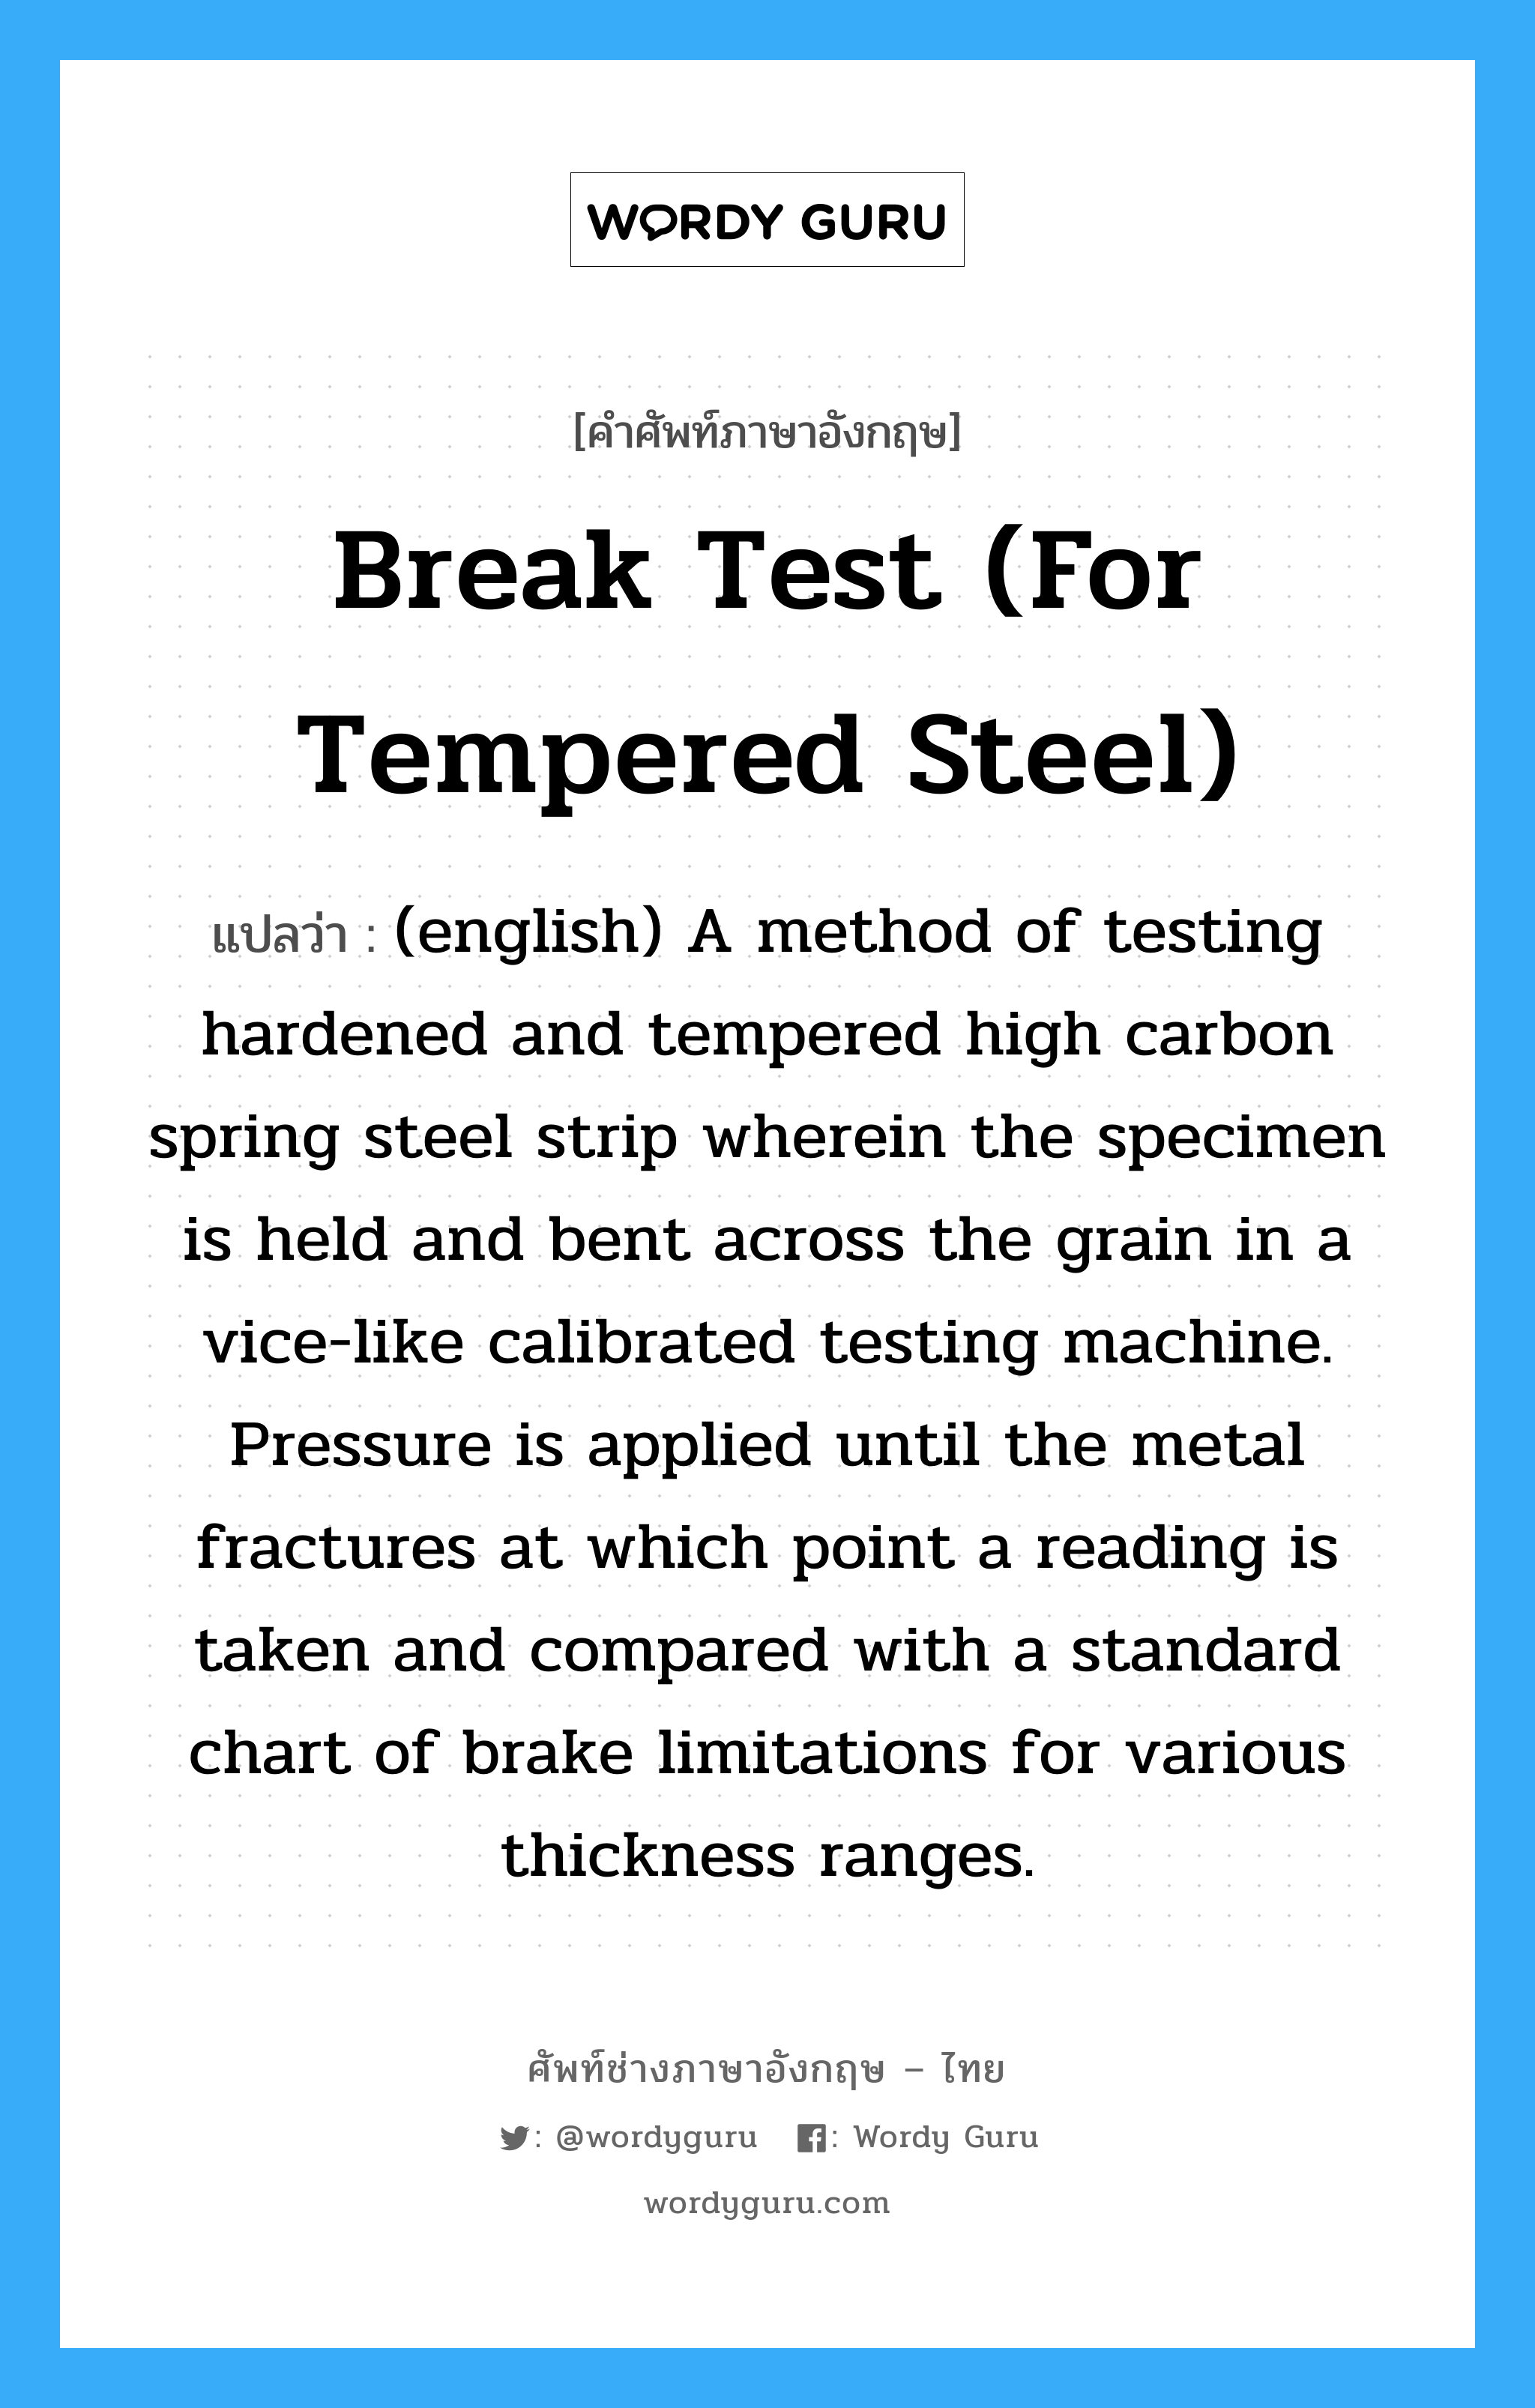 Break Test (for tempered steel) แปลว่า?, คำศัพท์ช่างภาษาอังกฤษ - ไทย Break Test (for tempered steel) คำศัพท์ภาษาอังกฤษ Break Test (for tempered steel) แปลว่า (english) A method of testing hardened and tempered high carbon spring steel strip wherein the specimen is held and bent across the grain in a vice-like calibrated testing machine. Pressure is applied until the metal fractures at which point a reading is taken and compared with a standard chart of brake limitations for various thickness ranges.